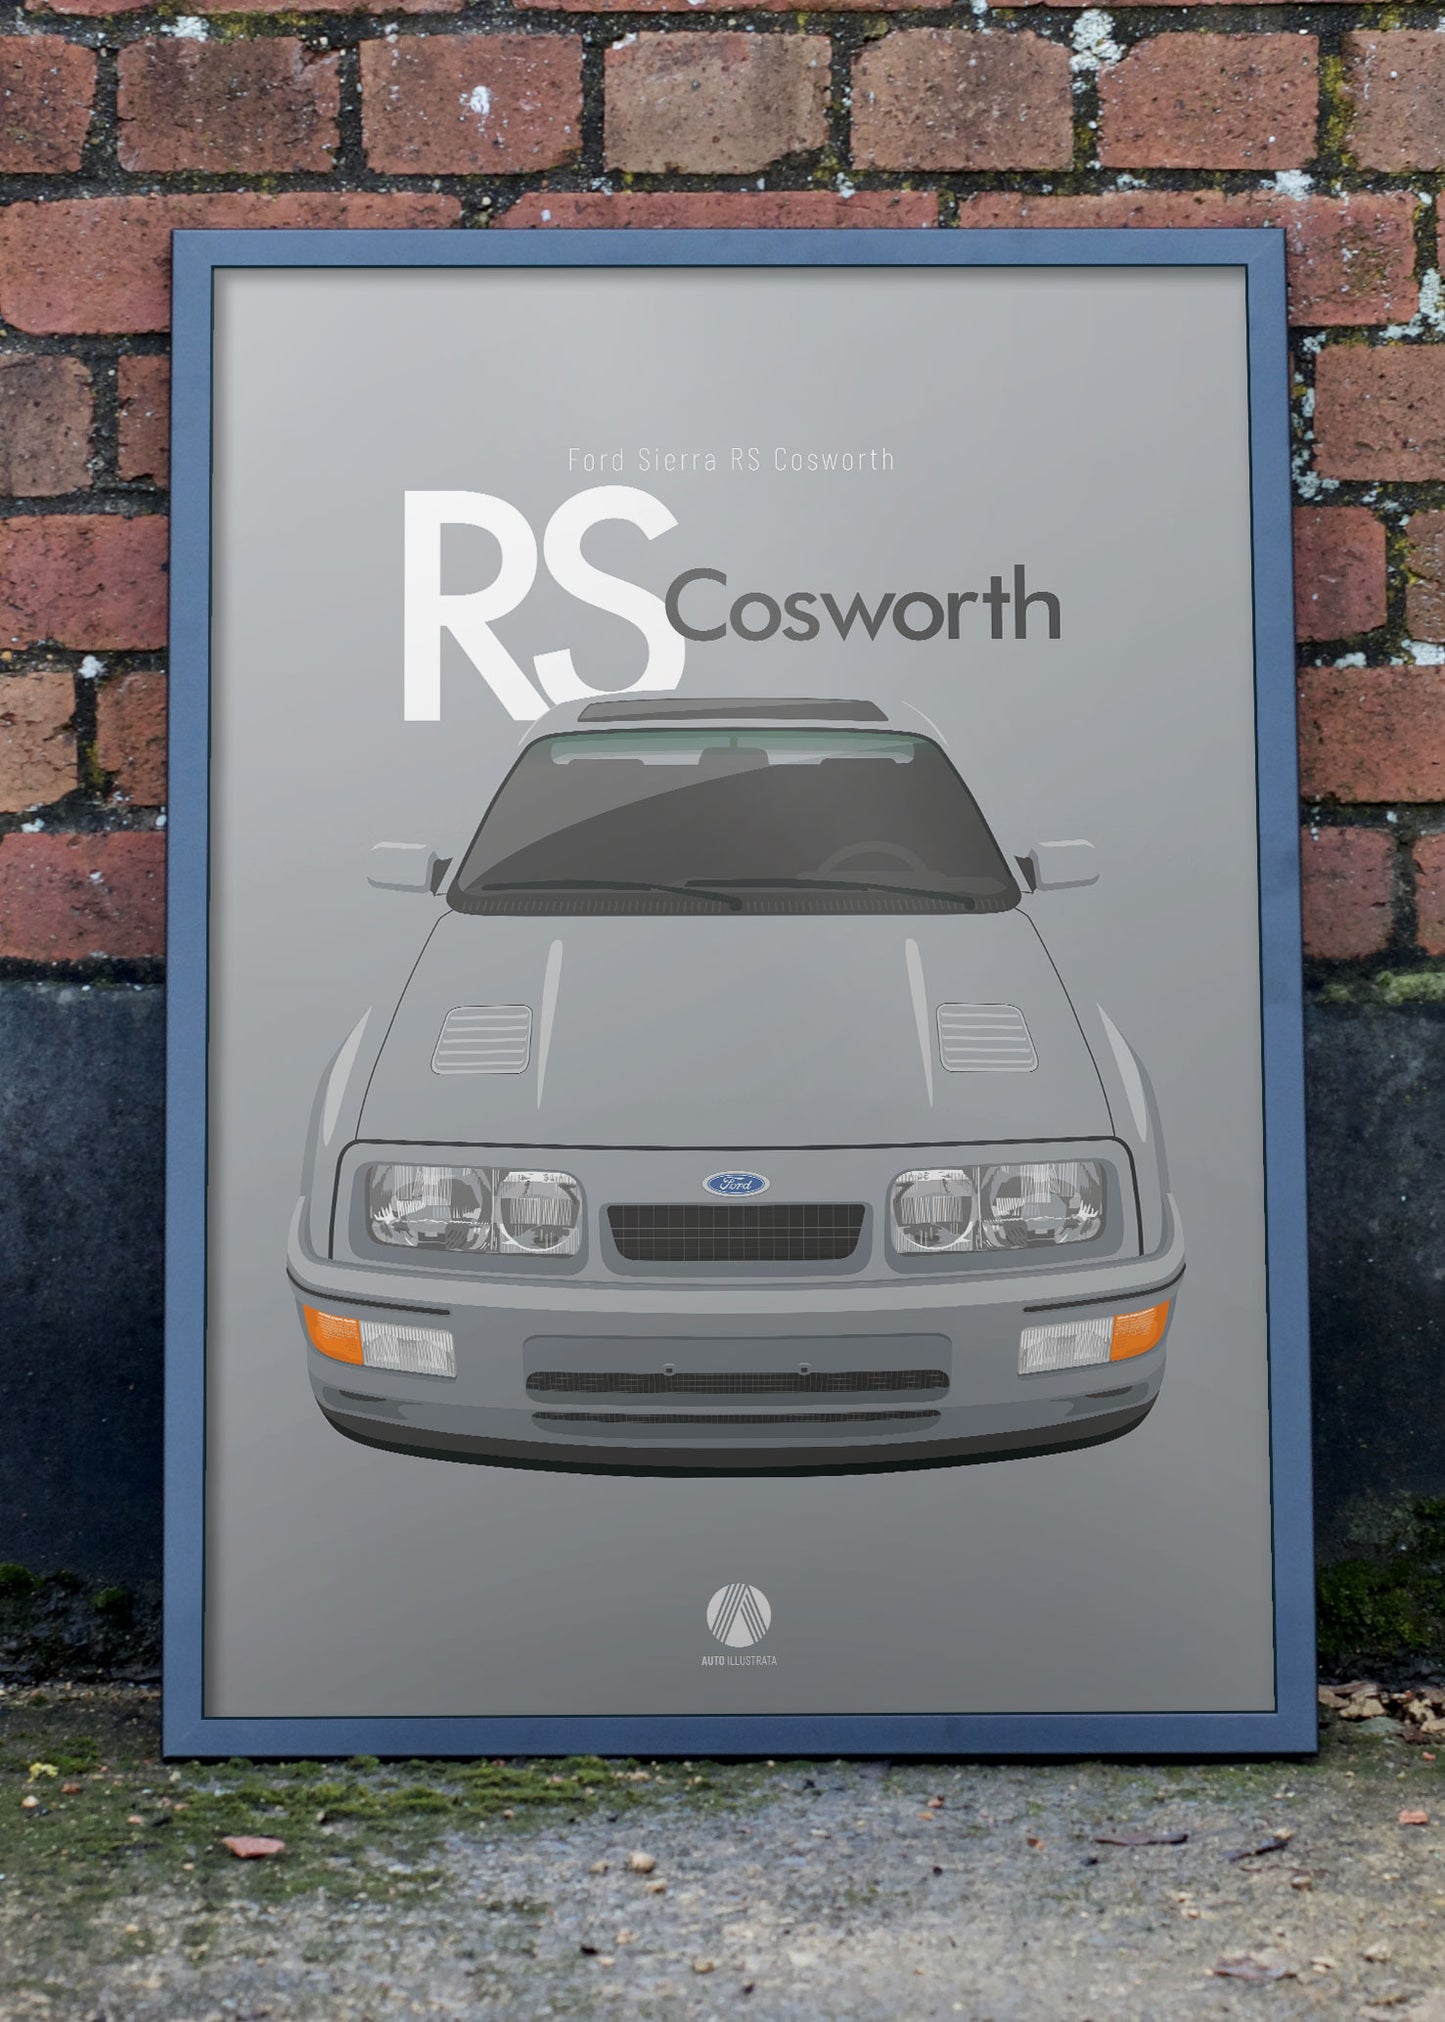 1986 Ford Sierra RS Cosworth - Moonstone Blue - poster print